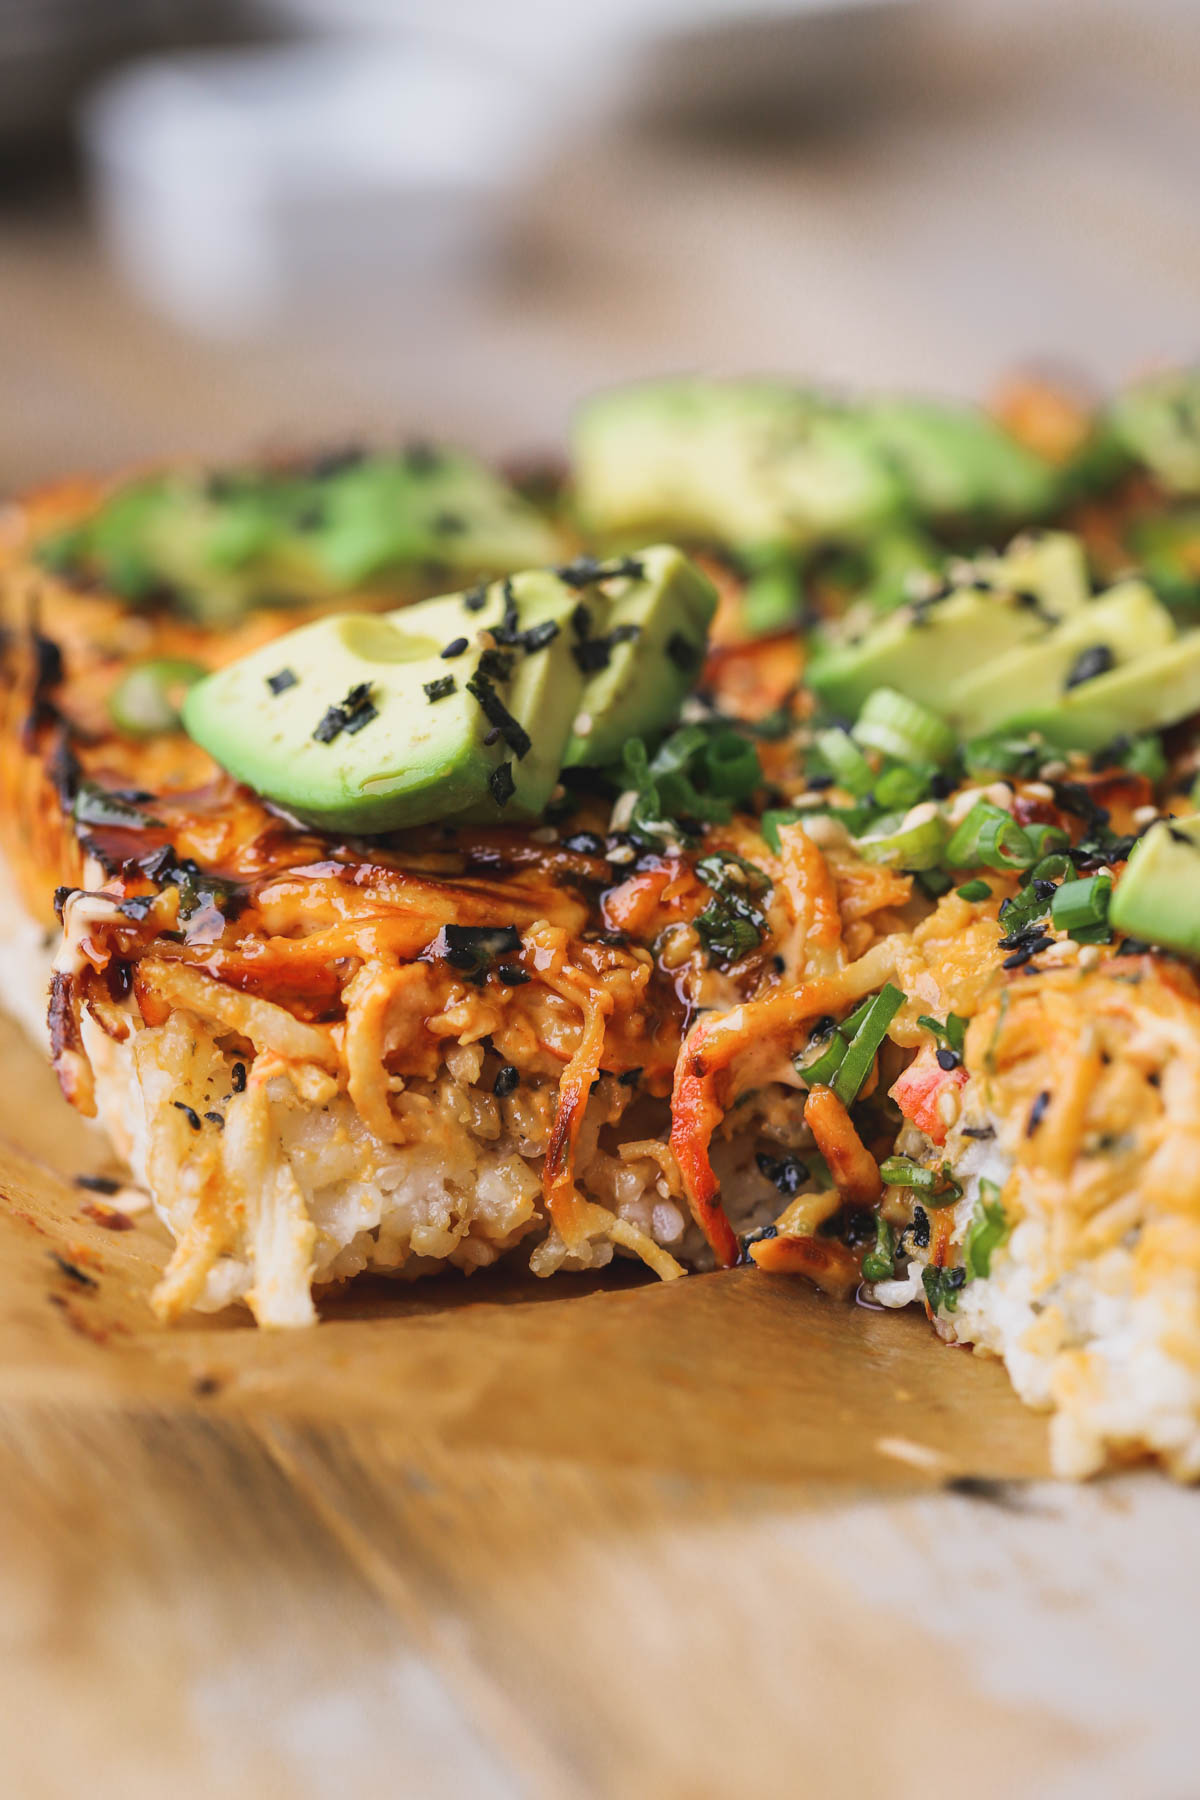 Spicy salmon sushi bake with crab meat, avocado, green onions and sesame seeds.  